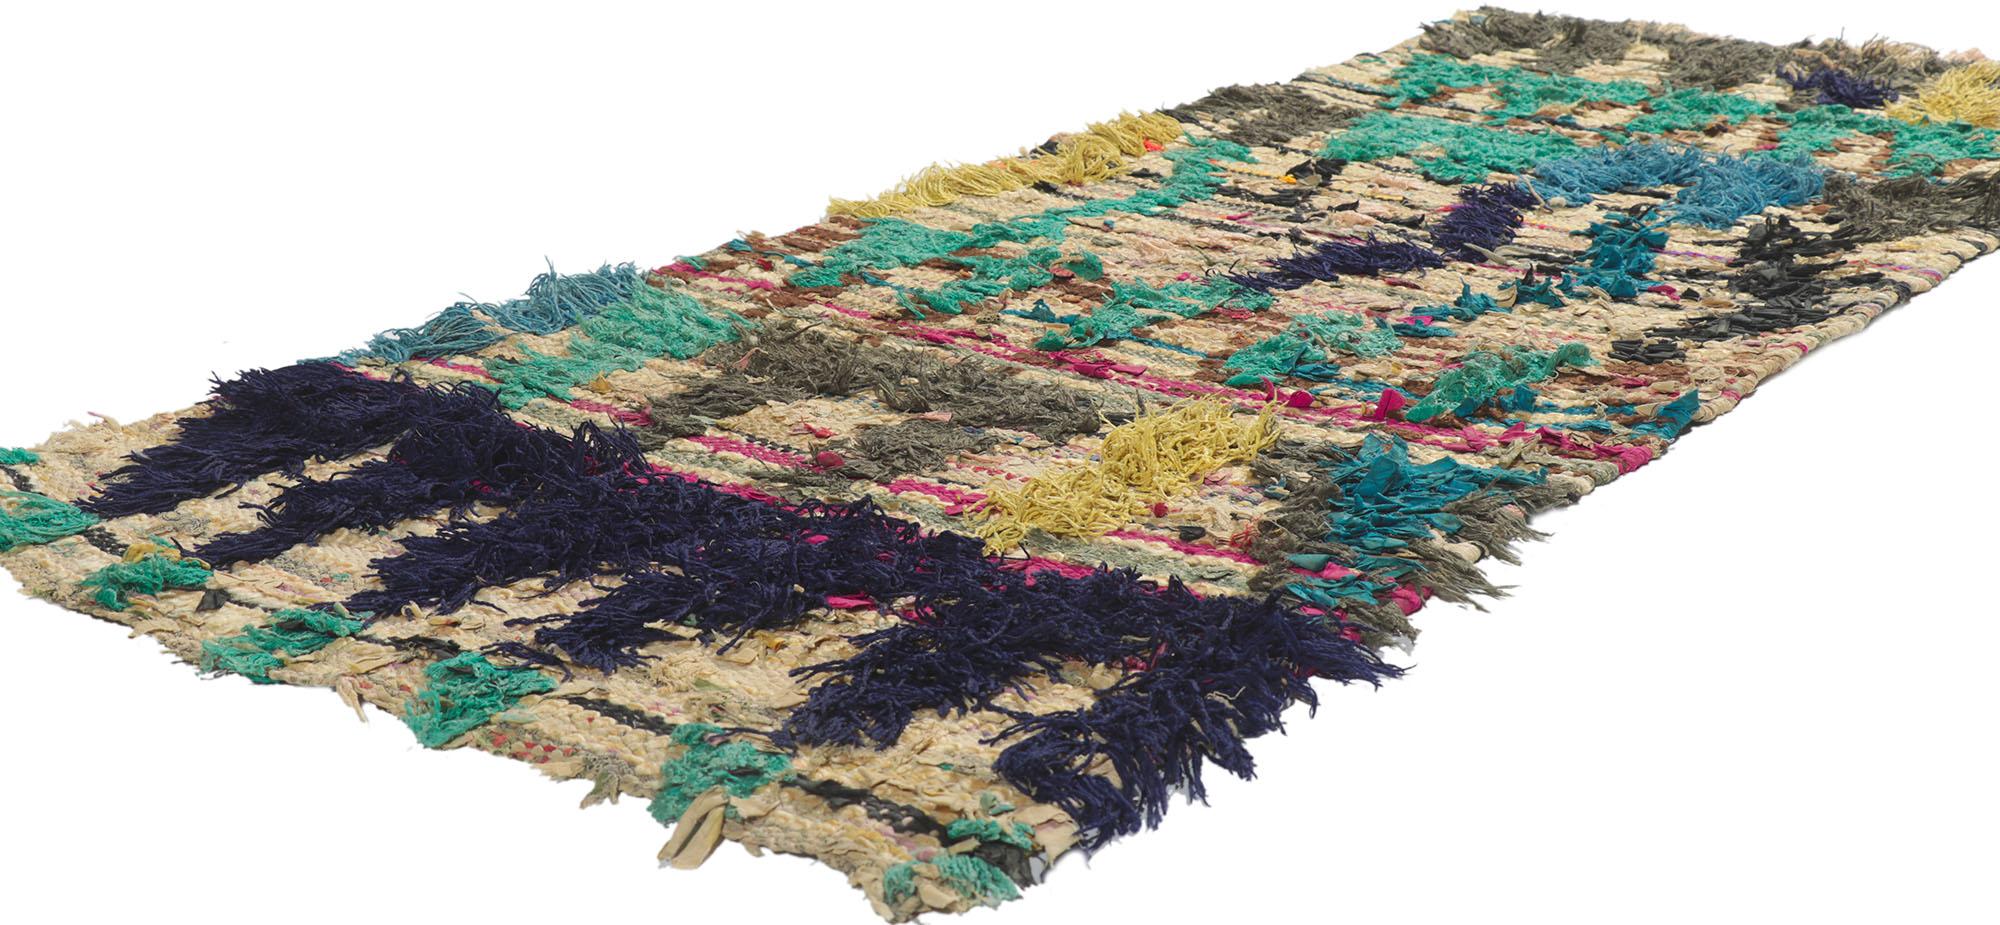 21632 vintage Berber Moroccan Boucherouite rug with Tribal style 02'06 x 05'06. With its expressive tribal design, incredible detail and texture, this hand knotted vintage Berber Moroccan Boucherouite rug is a captivating vision of woven beauty. The